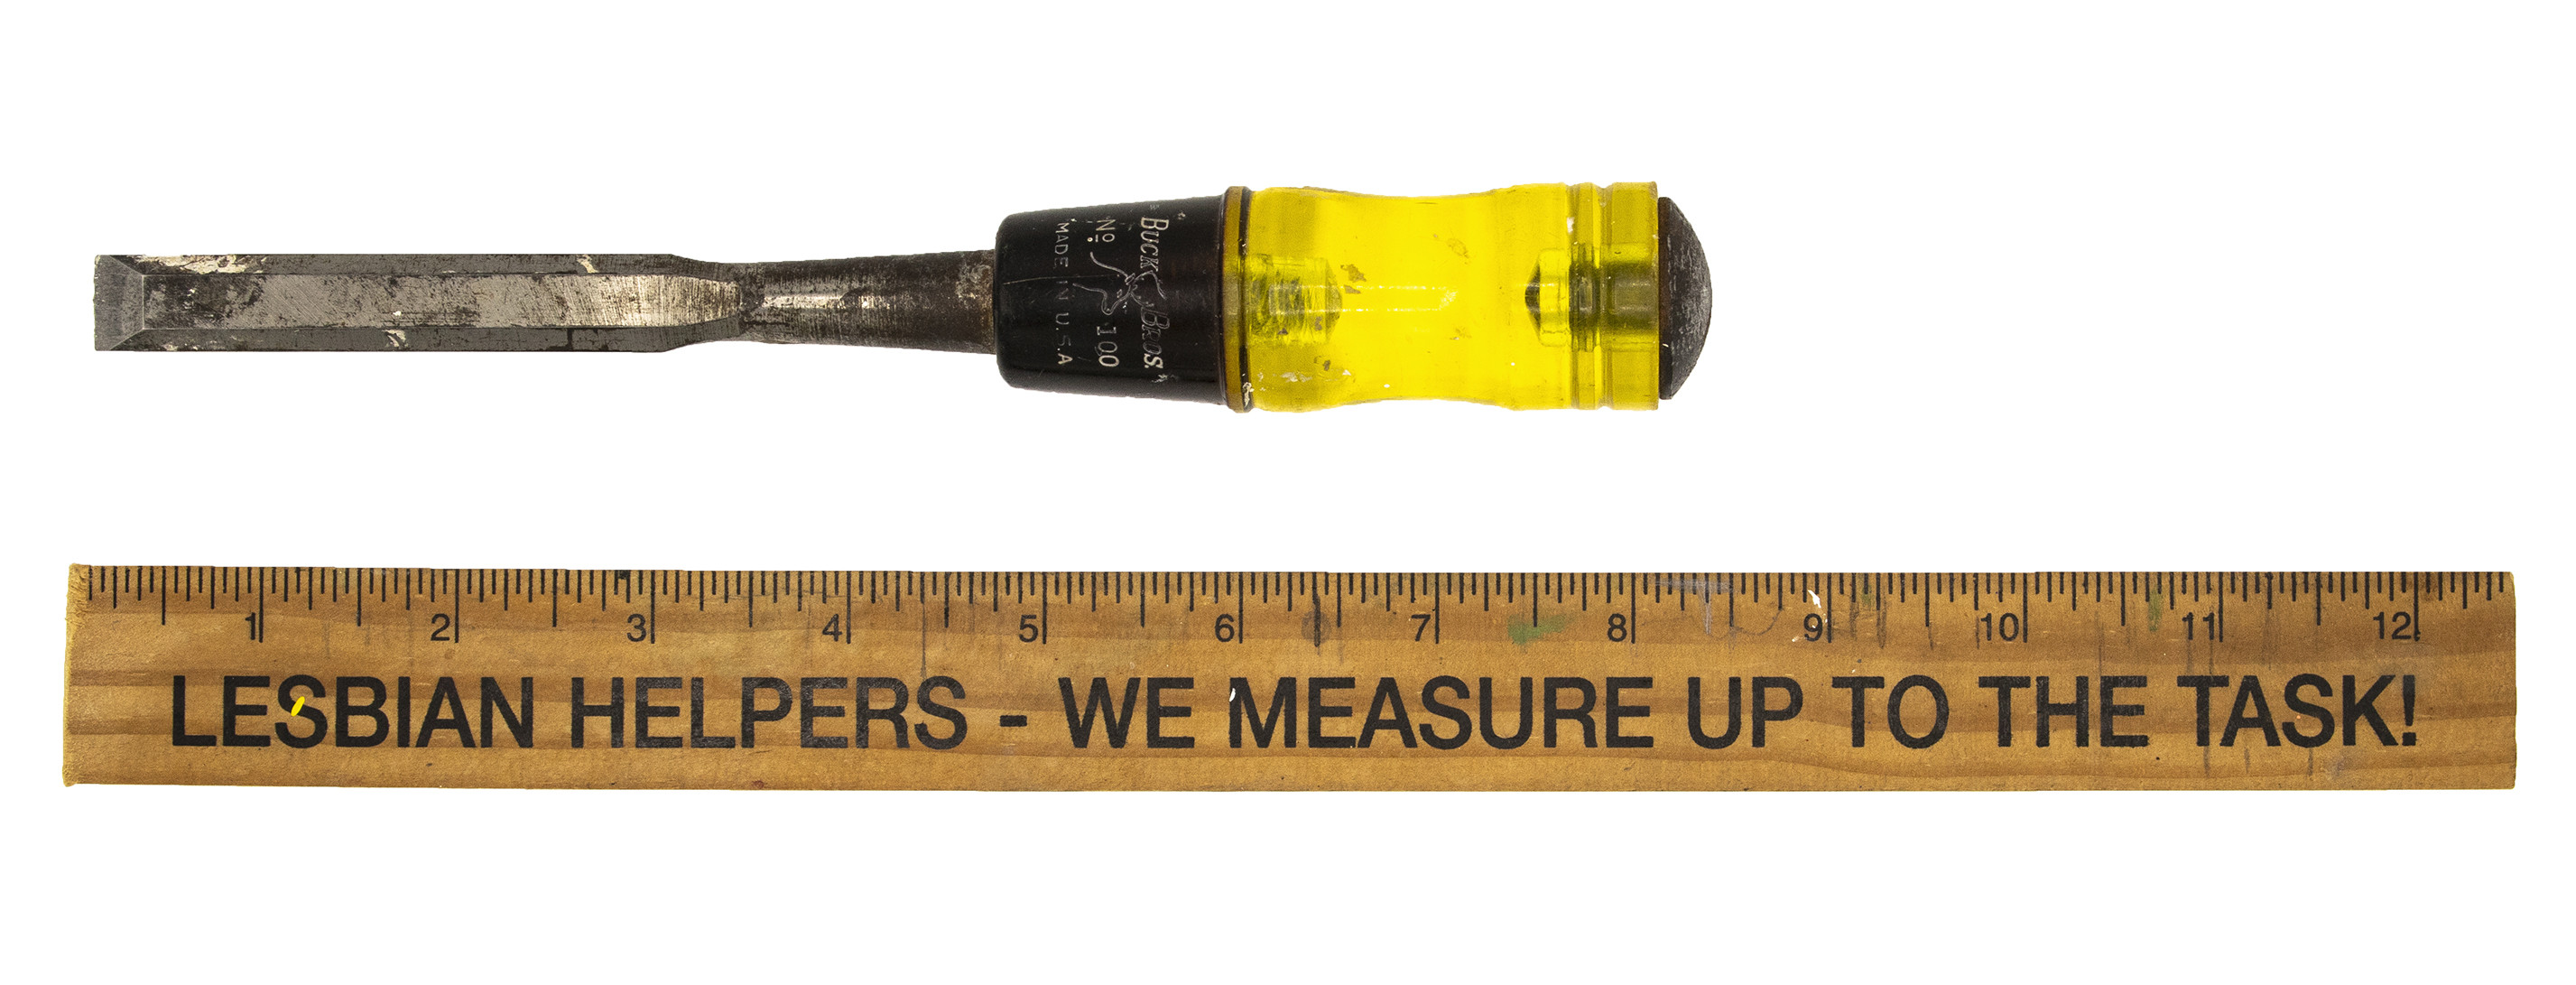 A screwdriver and ruler. The rules has the phrase 